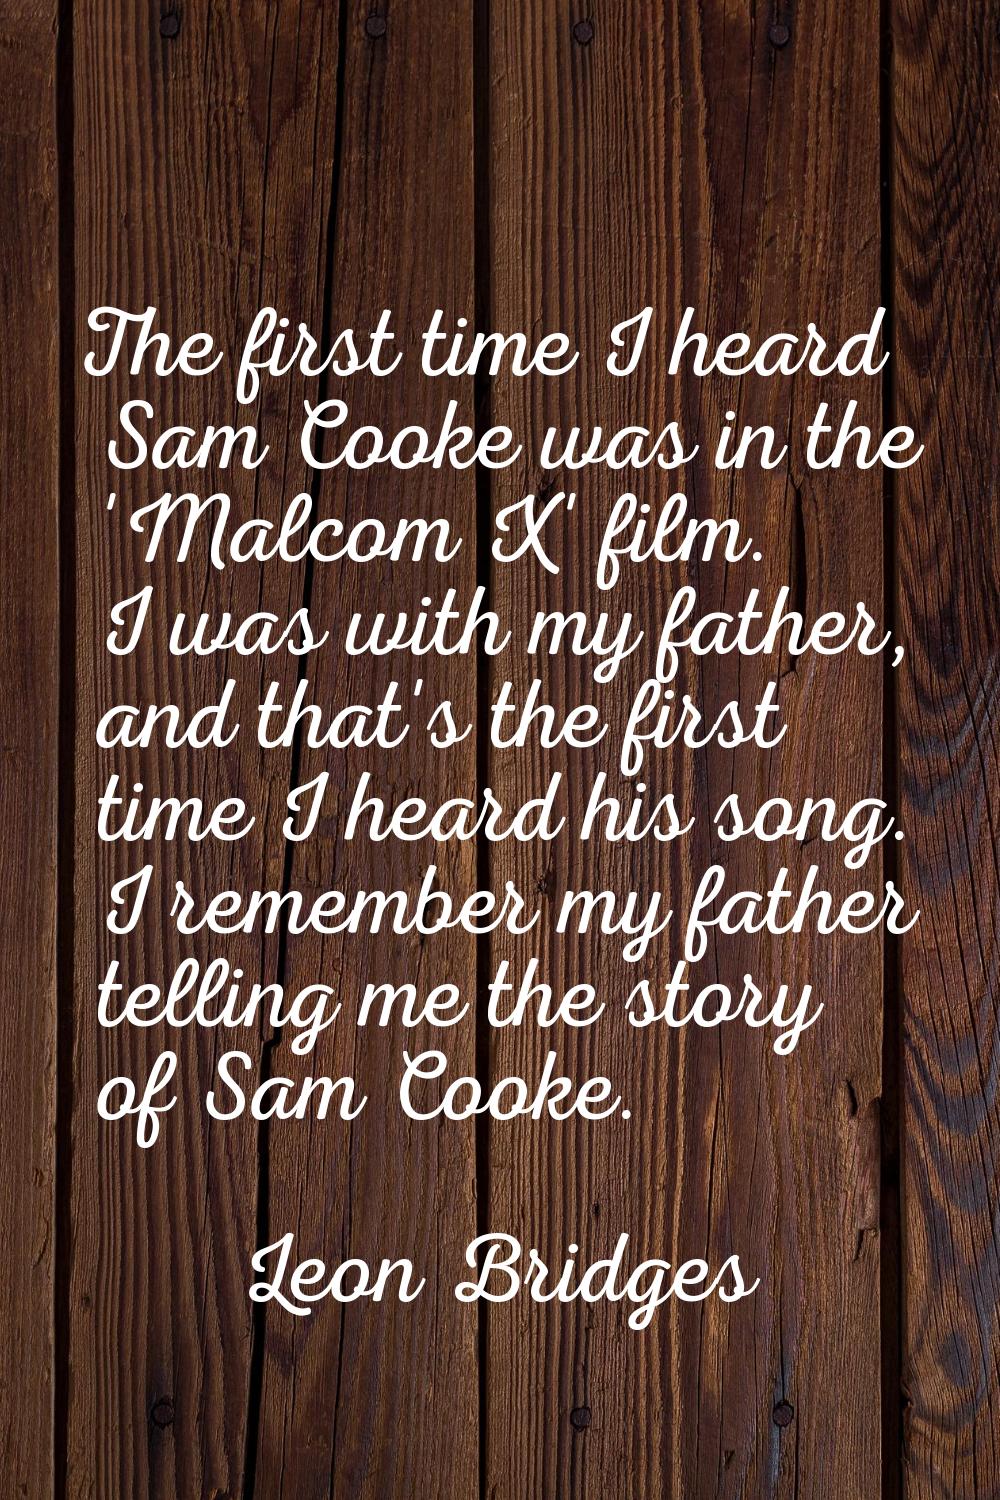 The first time I heard Sam Cooke was in the 'Malcom X' film. I was with my father, and that's the f